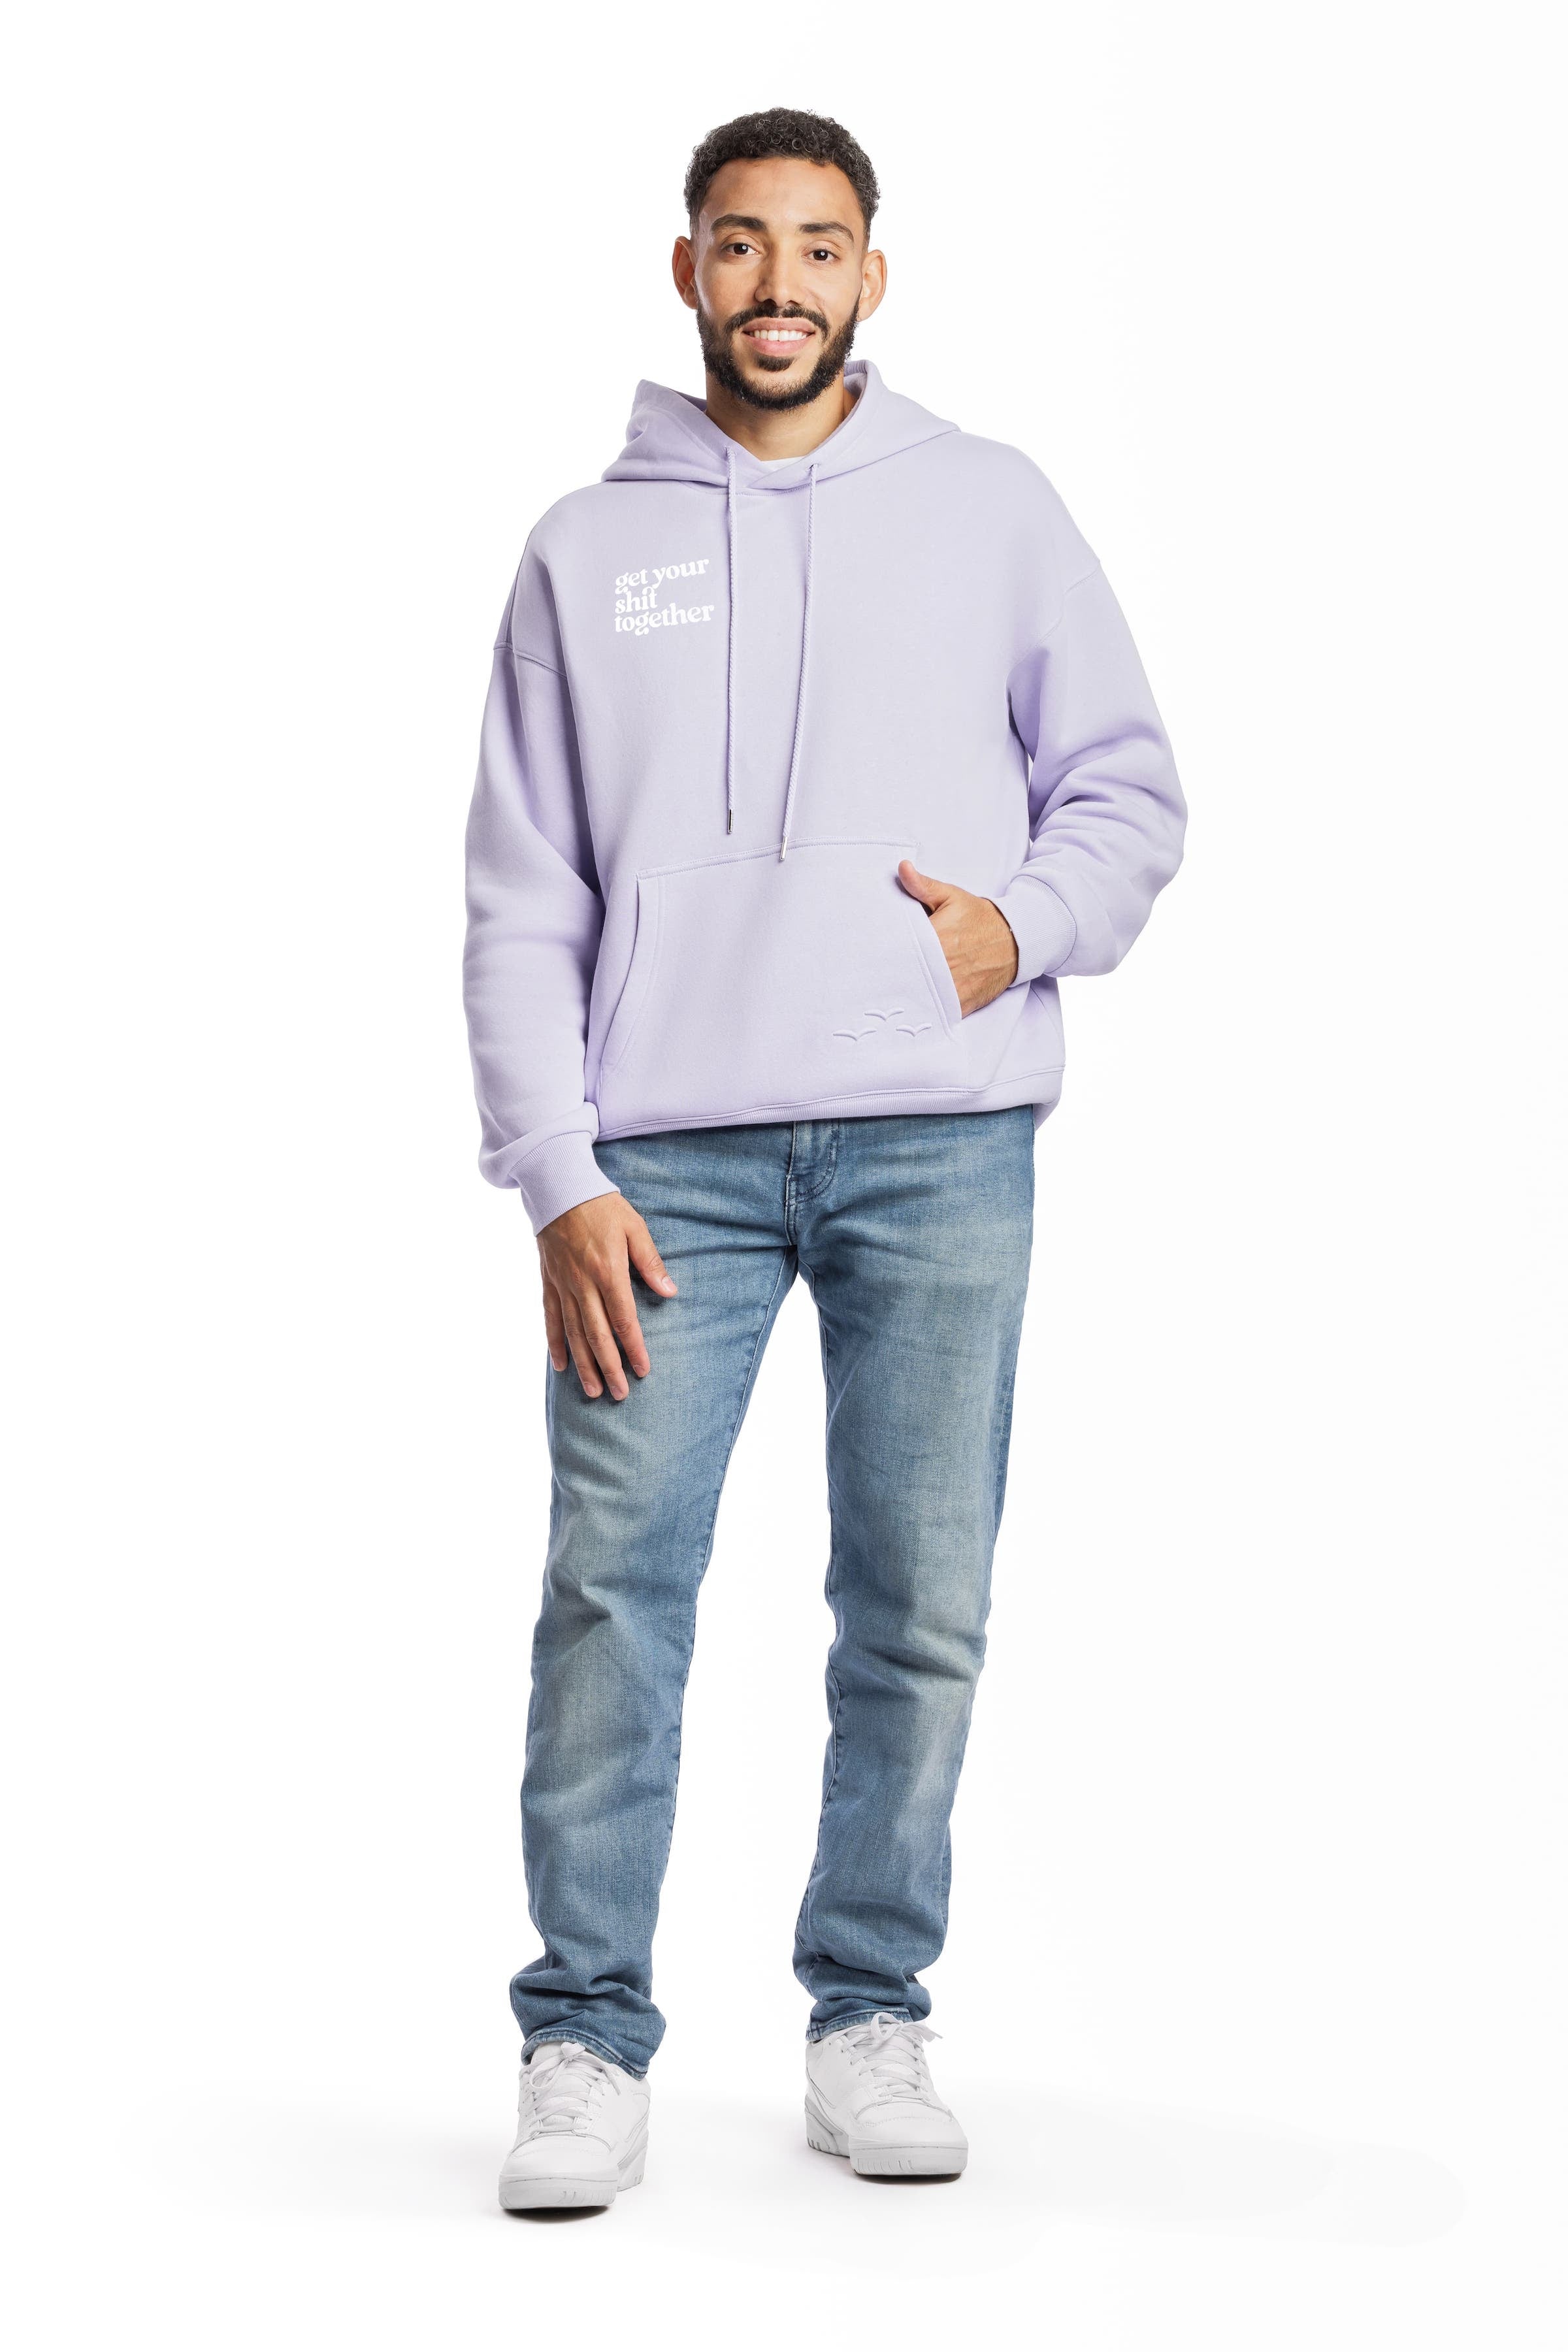 Cheeky relaxed hoodie in lavender